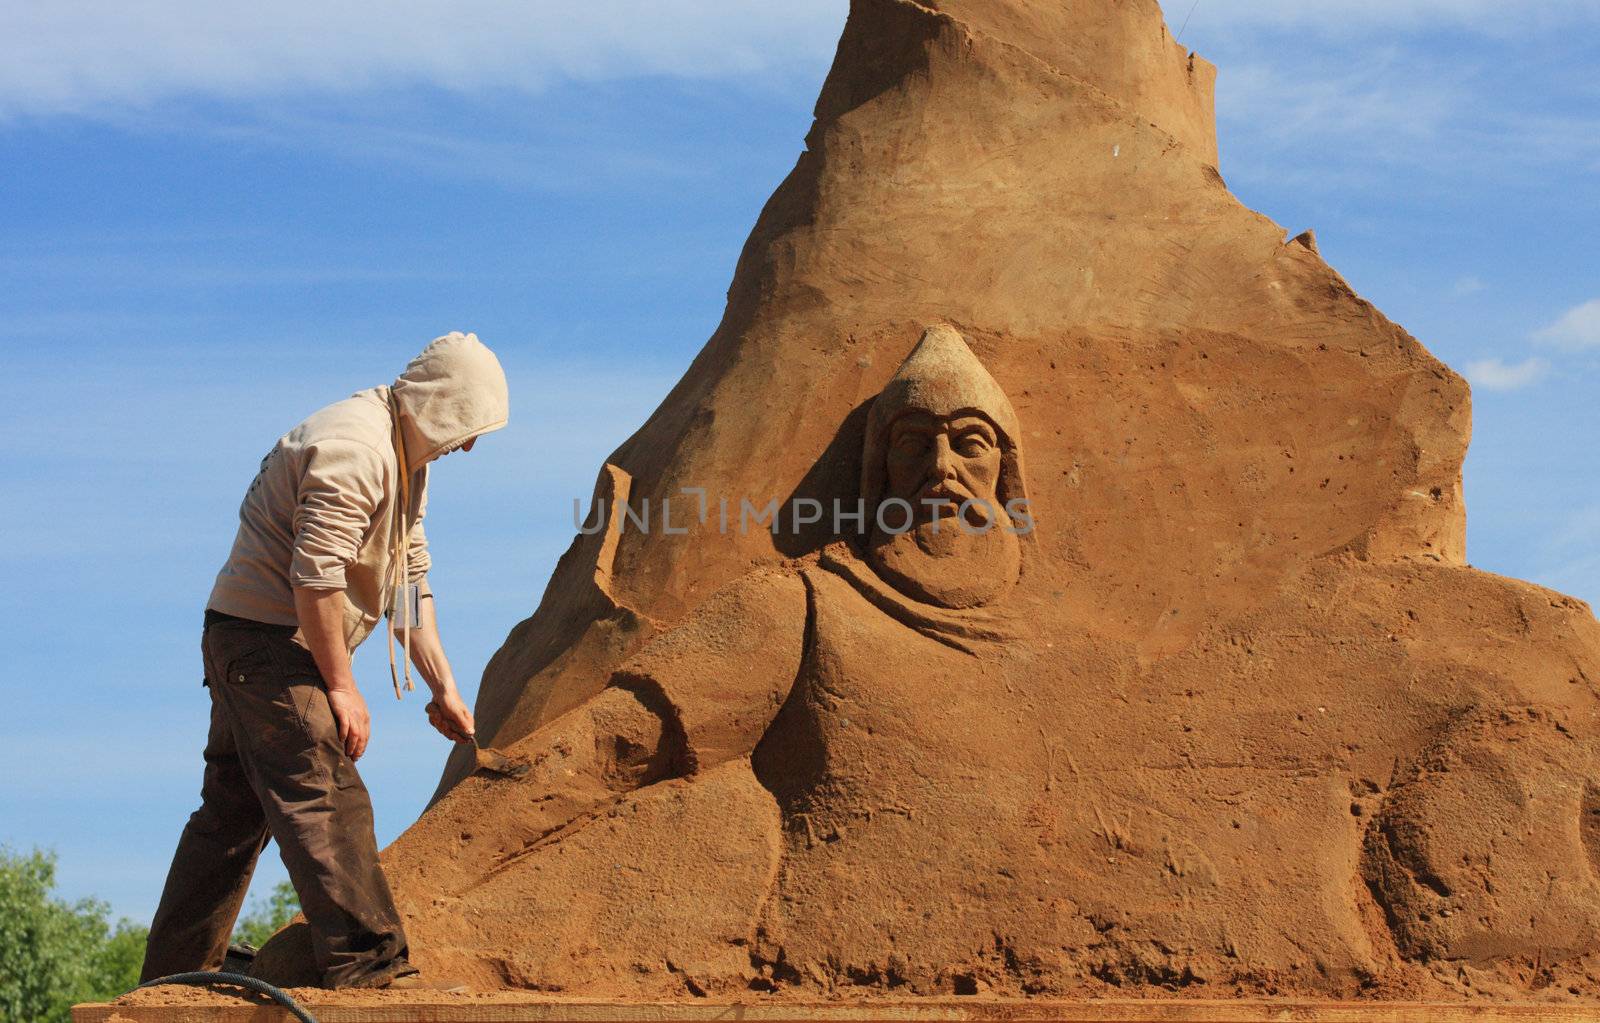 sculpture, sand,  person,  man, creates,  person,  head, an exhibition, product, art,  image